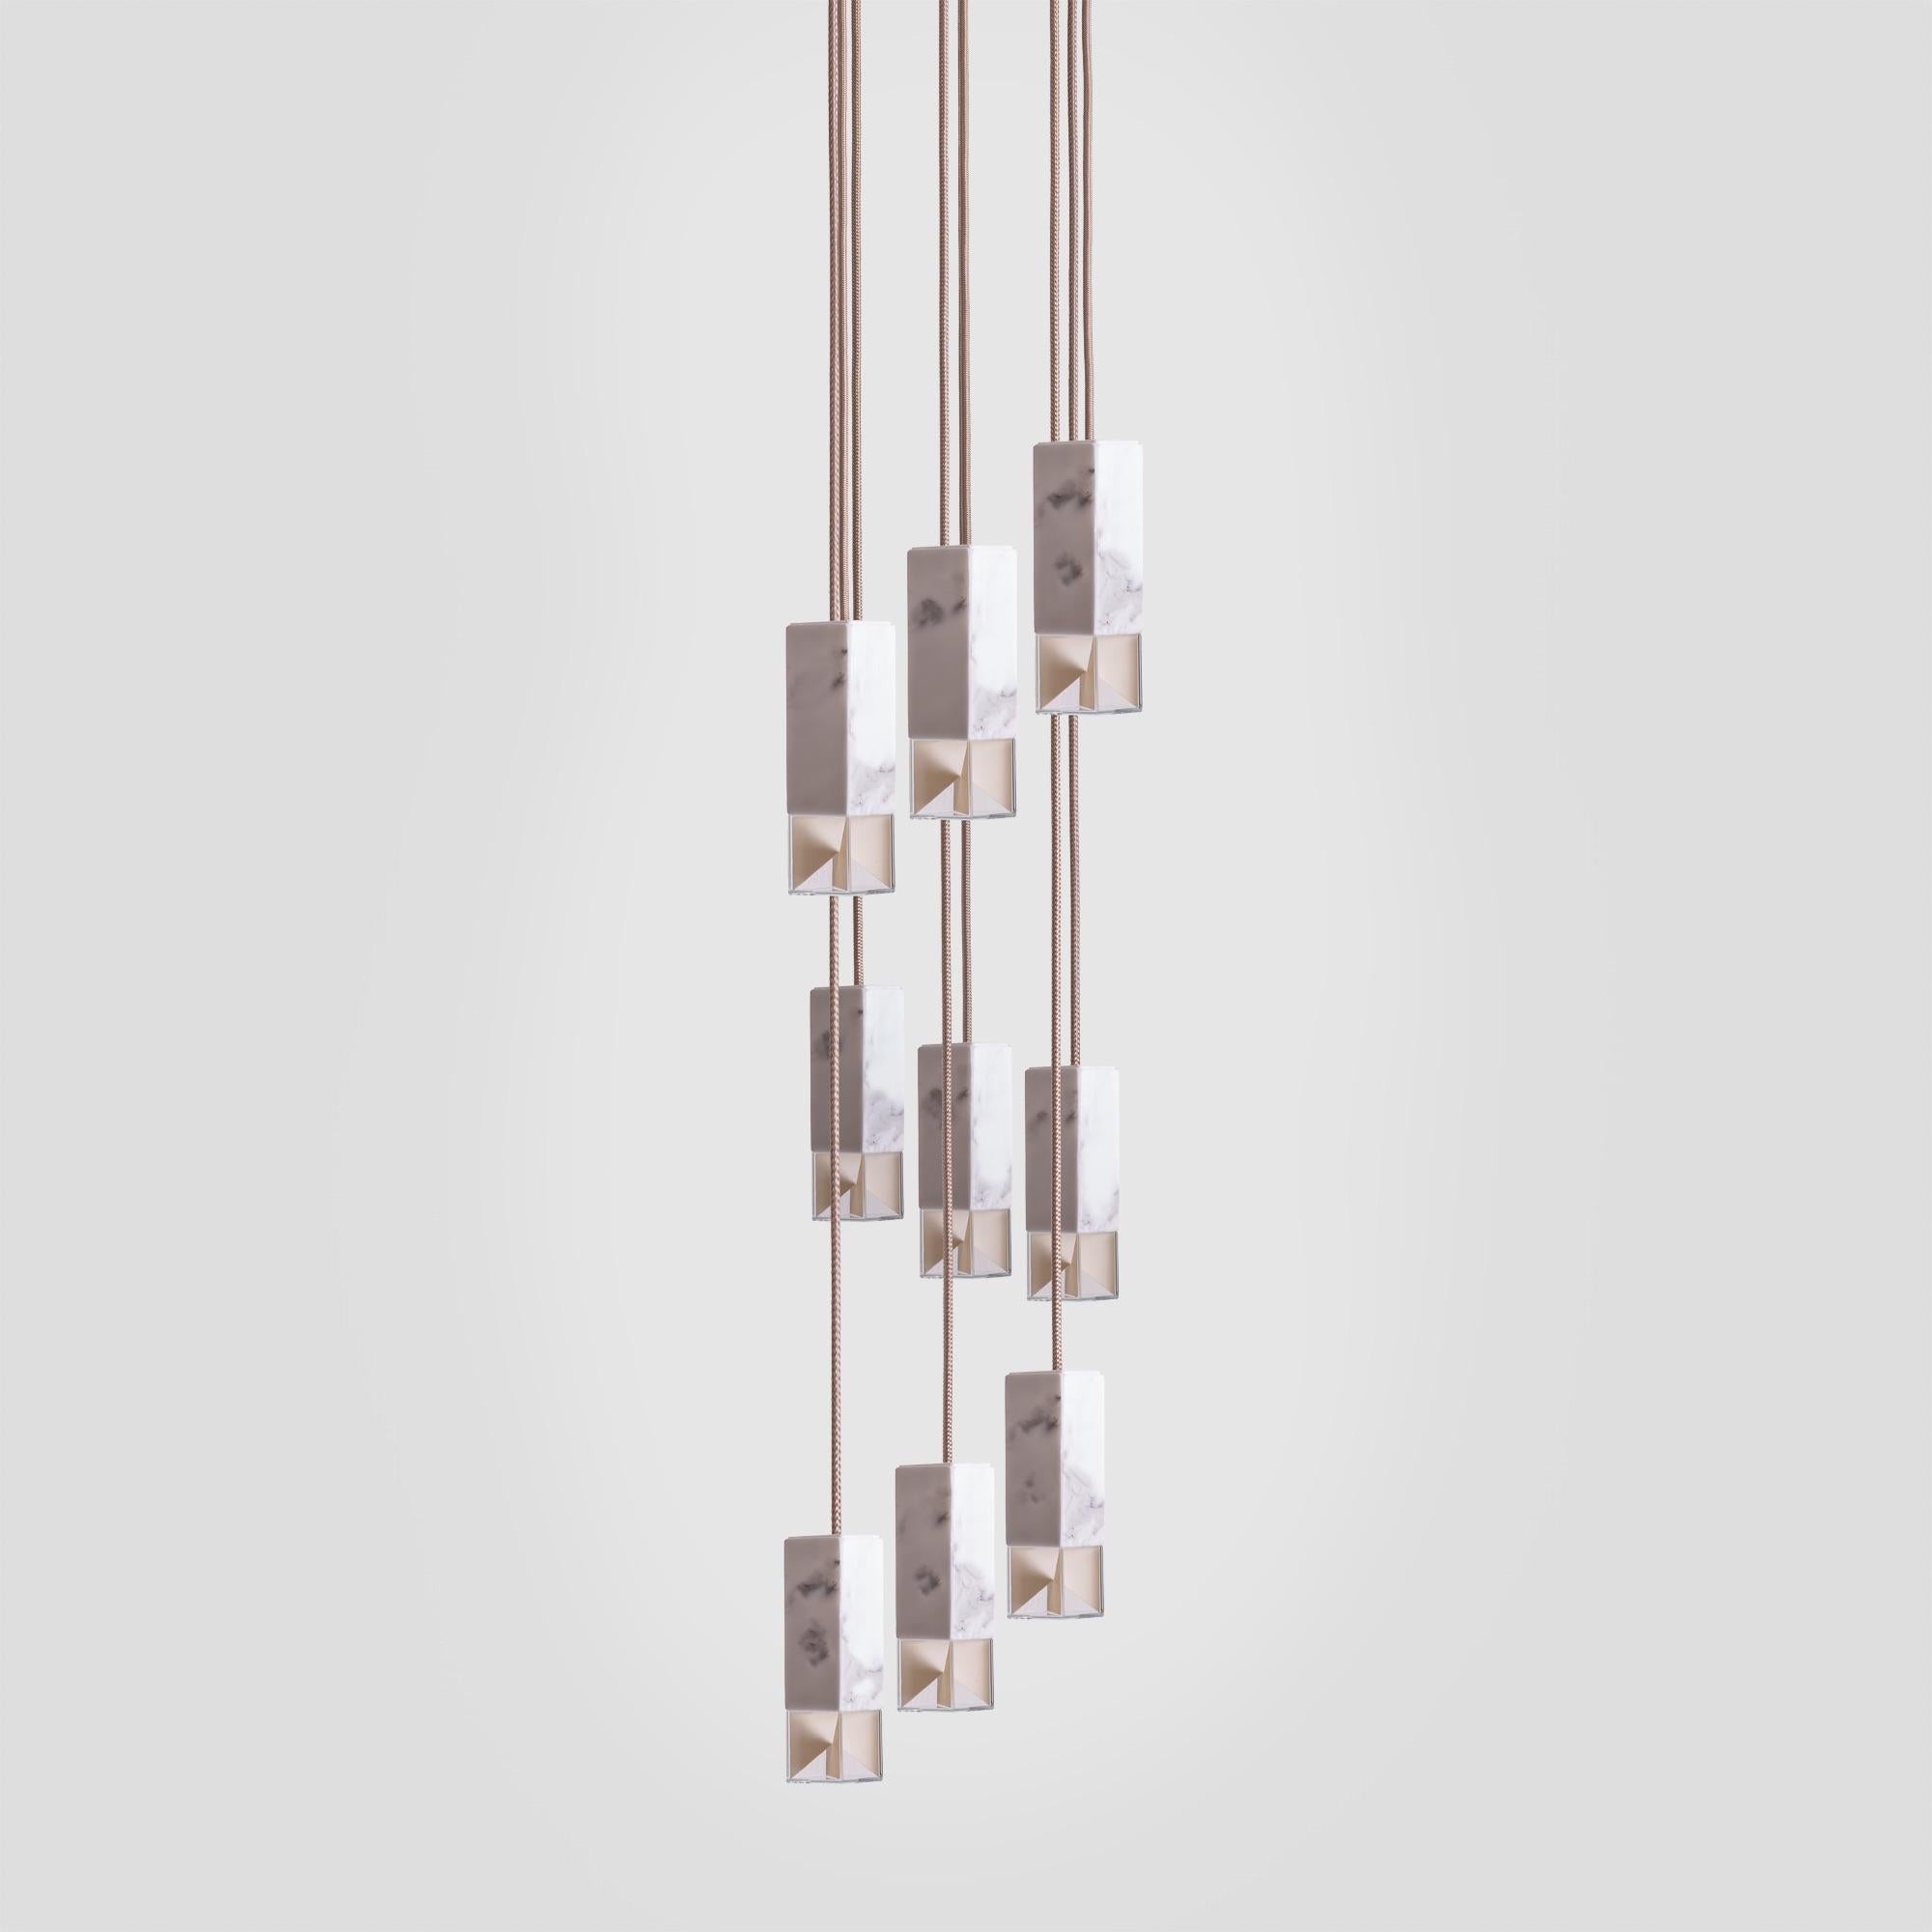 About
Ceiling Lamp 9 Light Chandelier Calacatta Marble Italy Handmade by Formaminima

Lamp/One Calacatta Marble 9 Light Chandelier from Chandeliers Series
Design by Formaminima
Chandelier
Materials:
Body lamp handcrafted in solid Calacatta marble /